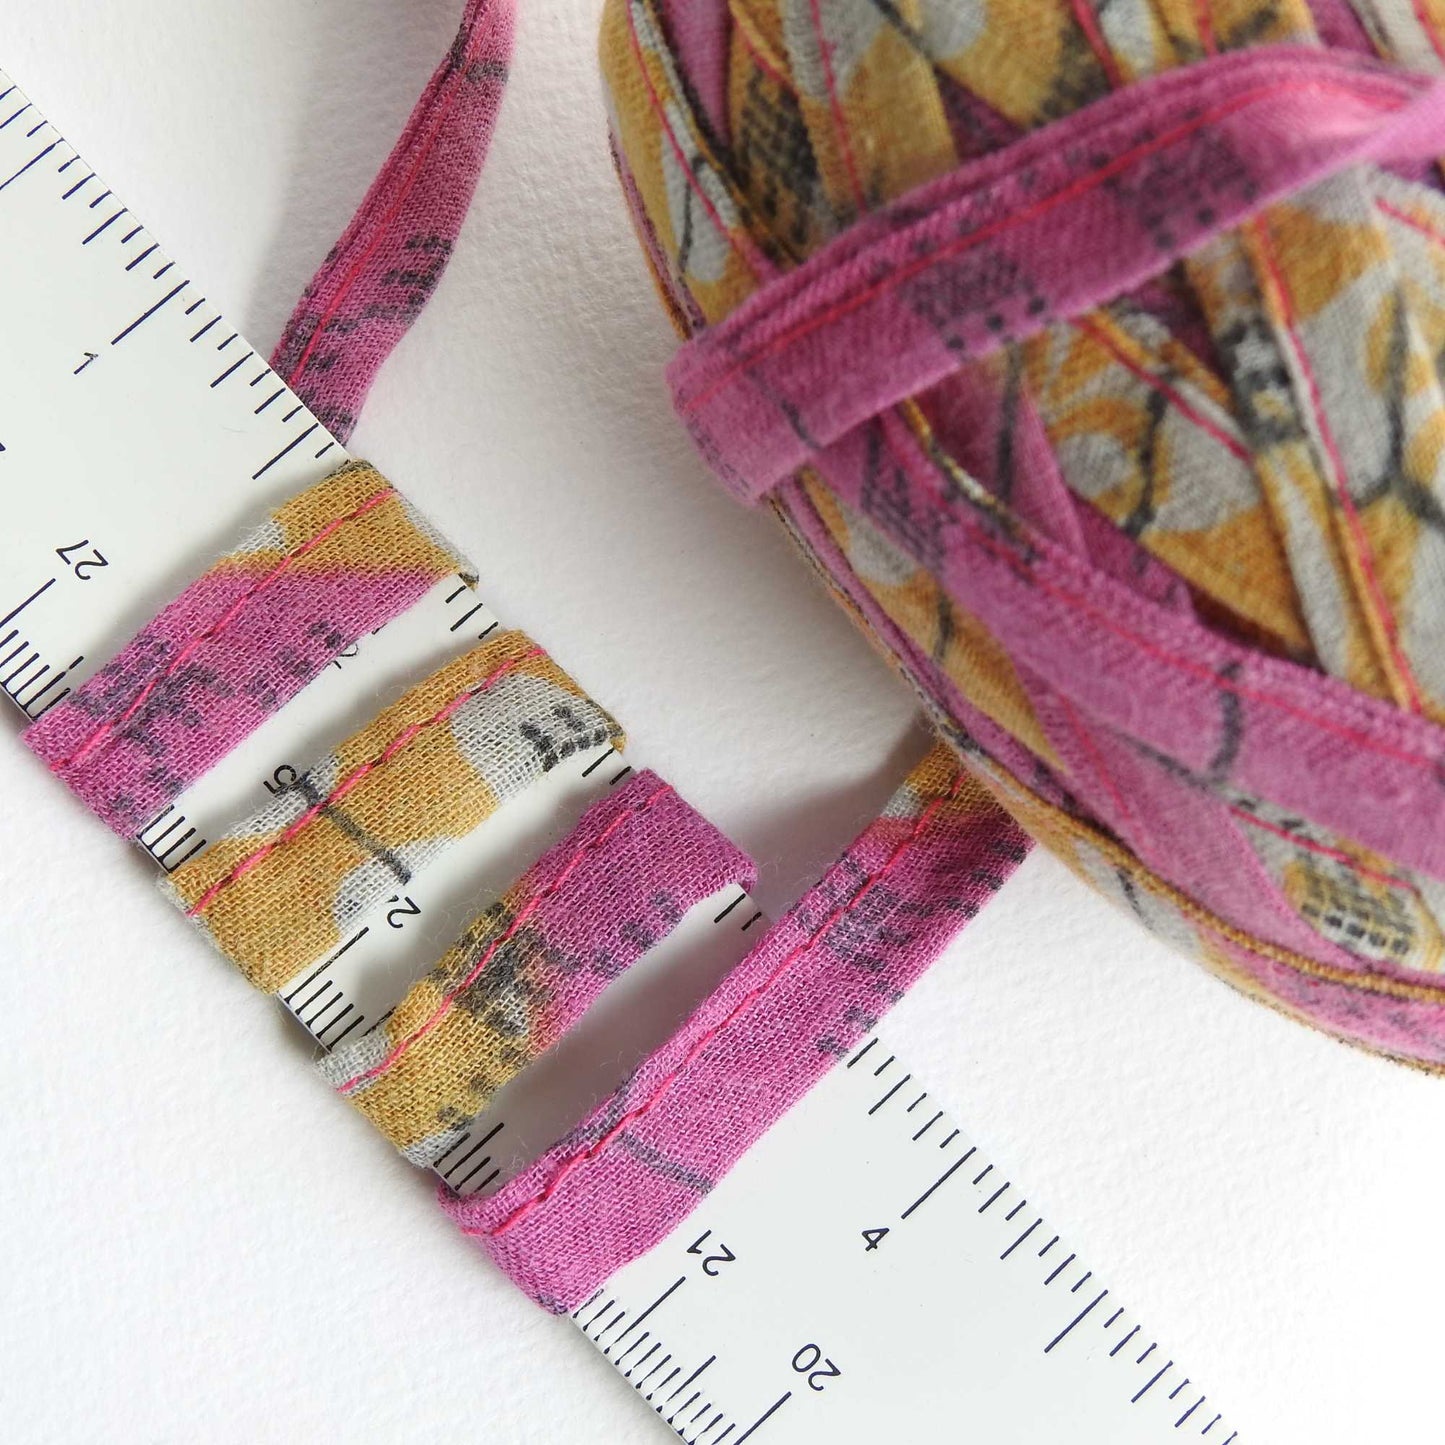 
                  
                    Upcycled Sari Cotton ribbon for wrapping, hair tie, flowers, weaving, basket making, sewing trim. Fair trade and upcycled materials. Hand crafted recycled yarn. Weaving, Knitting, Crochet
                  
                